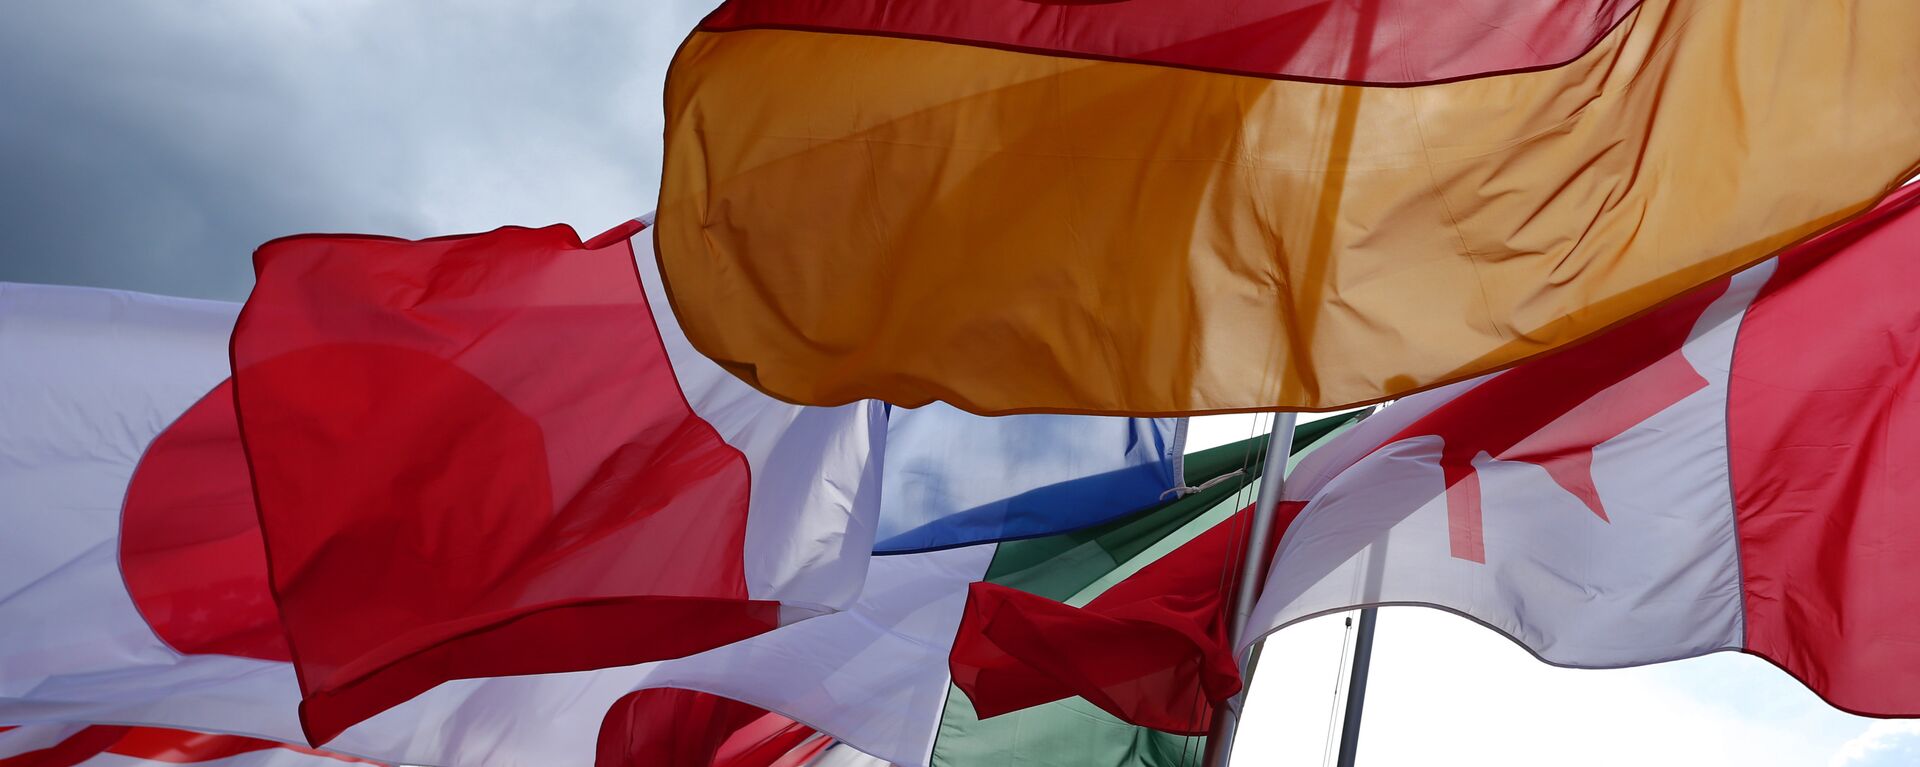 The flags of the G7 countries. File photo - Sputnik International, 1920, 26.06.2022